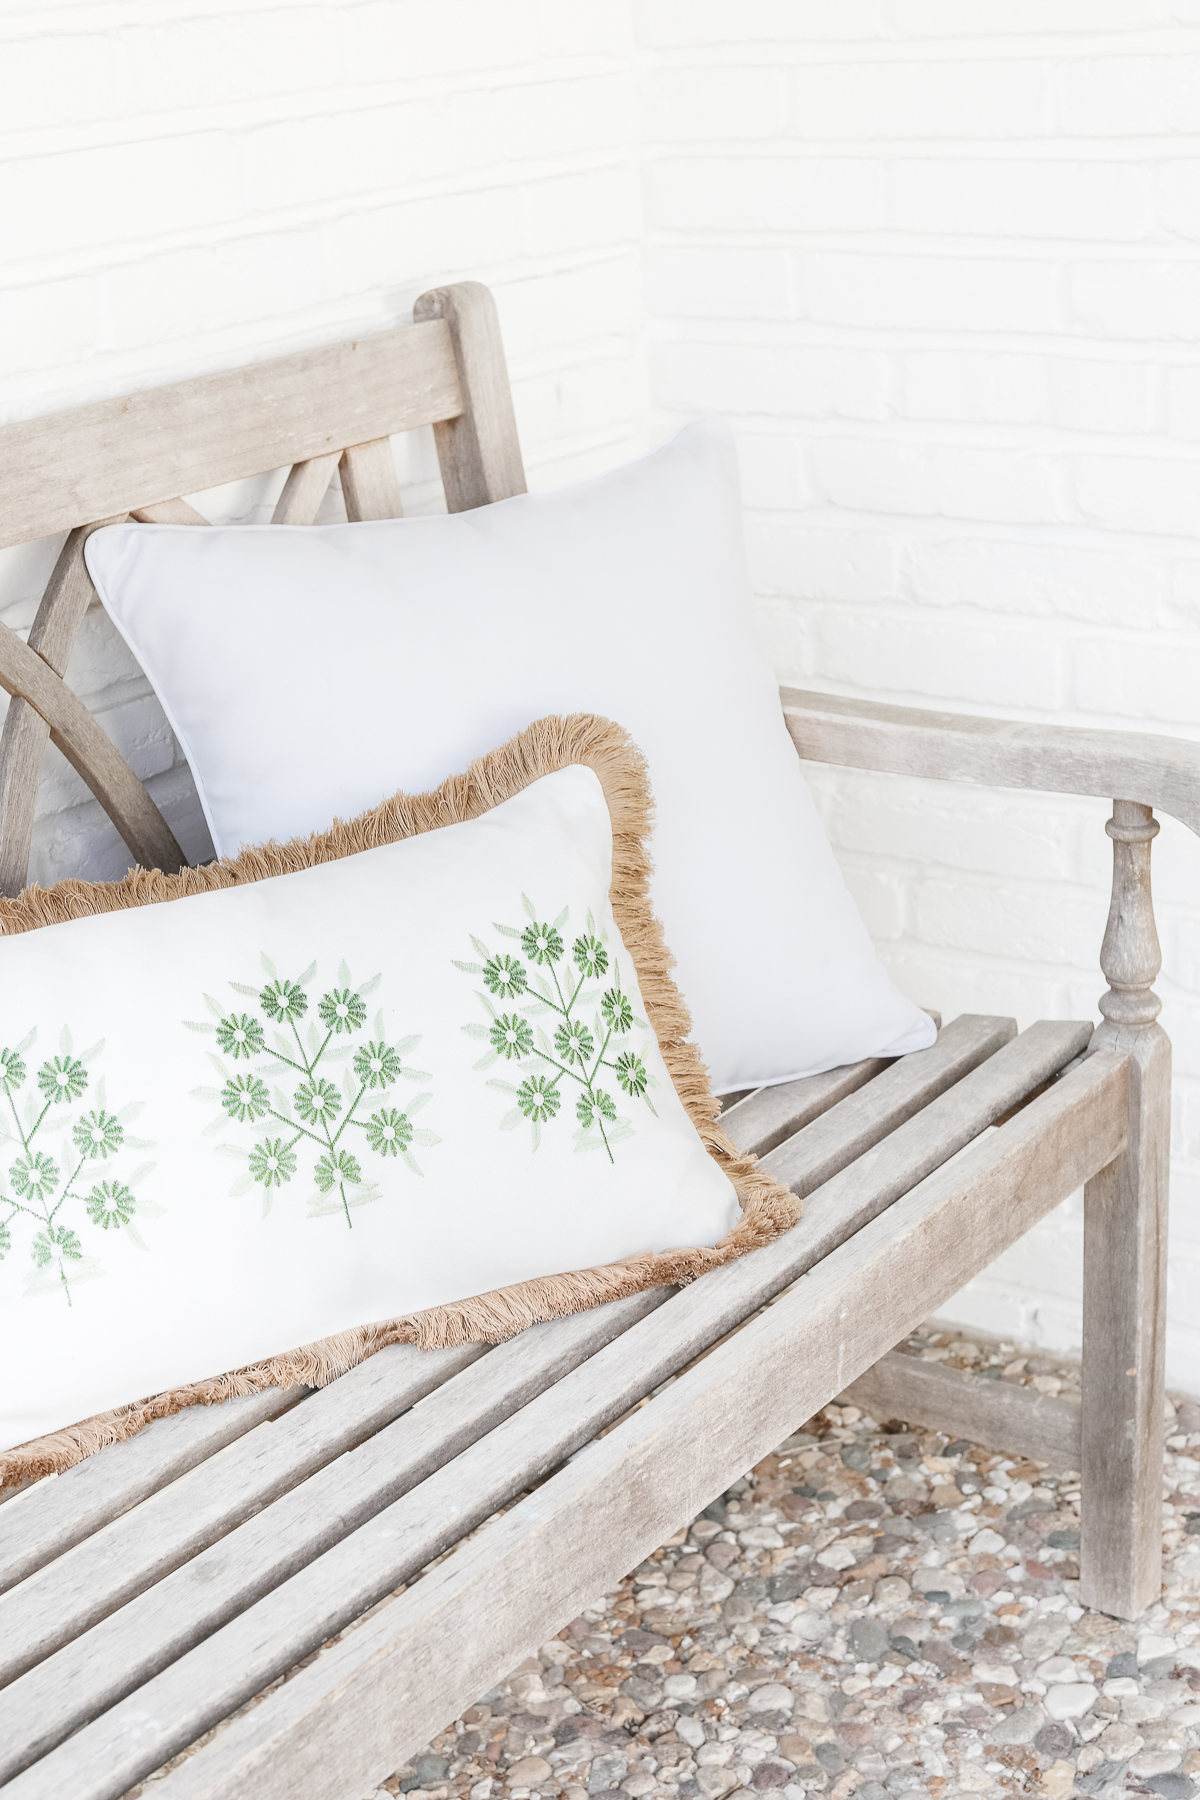 A wooden bench with a fringed white outdoor pillow and another outdoor pillow with green botanical print against a white brick wall.